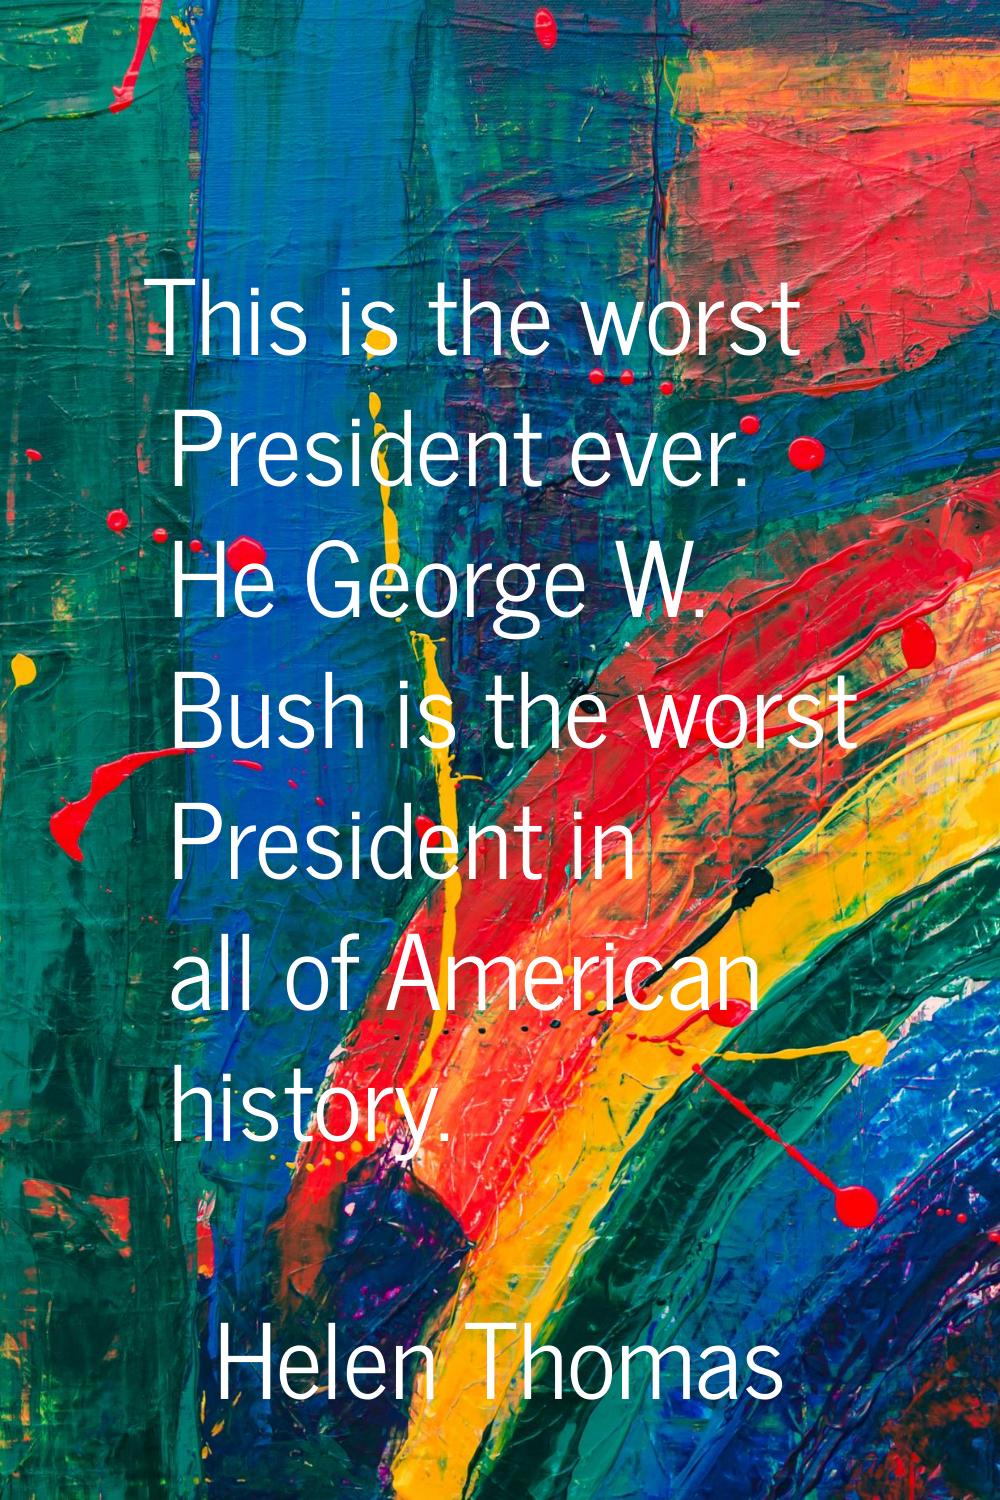 This is the worst President ever. He George W. Bush is the worst President in all of American histo